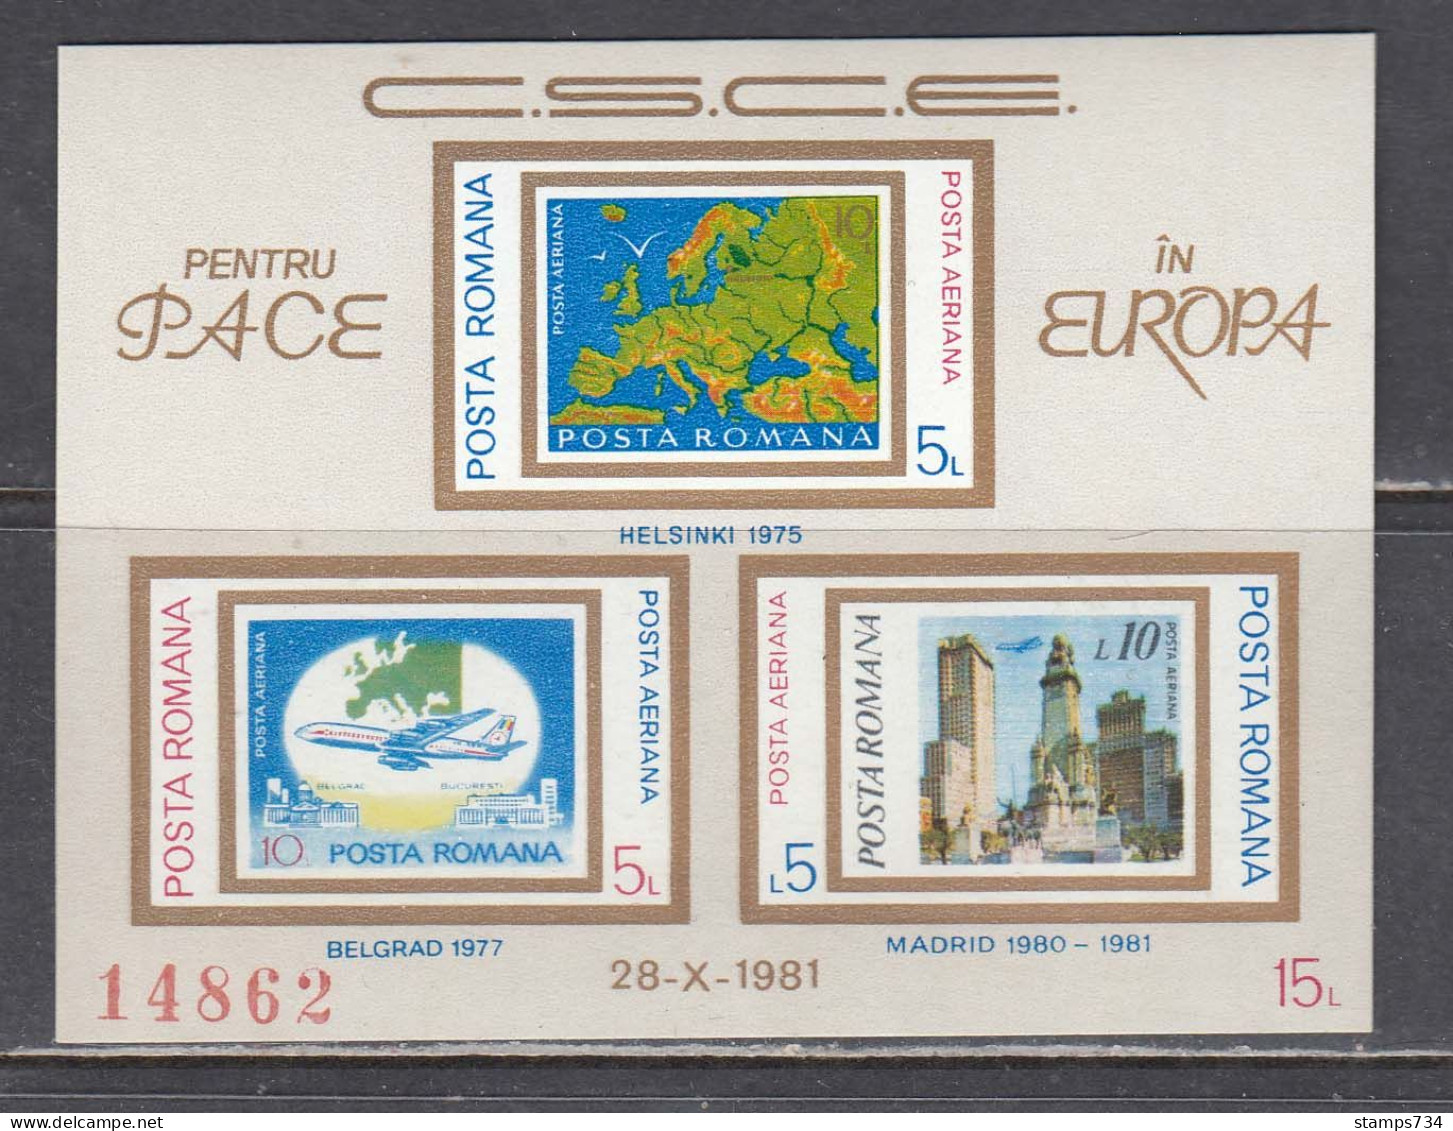 Romania 1981 - Conference On Security And Cooperation In Europe (CSCE), Madrid, Mi-Nr. Bl. 183, MNH** - Unused Stamps